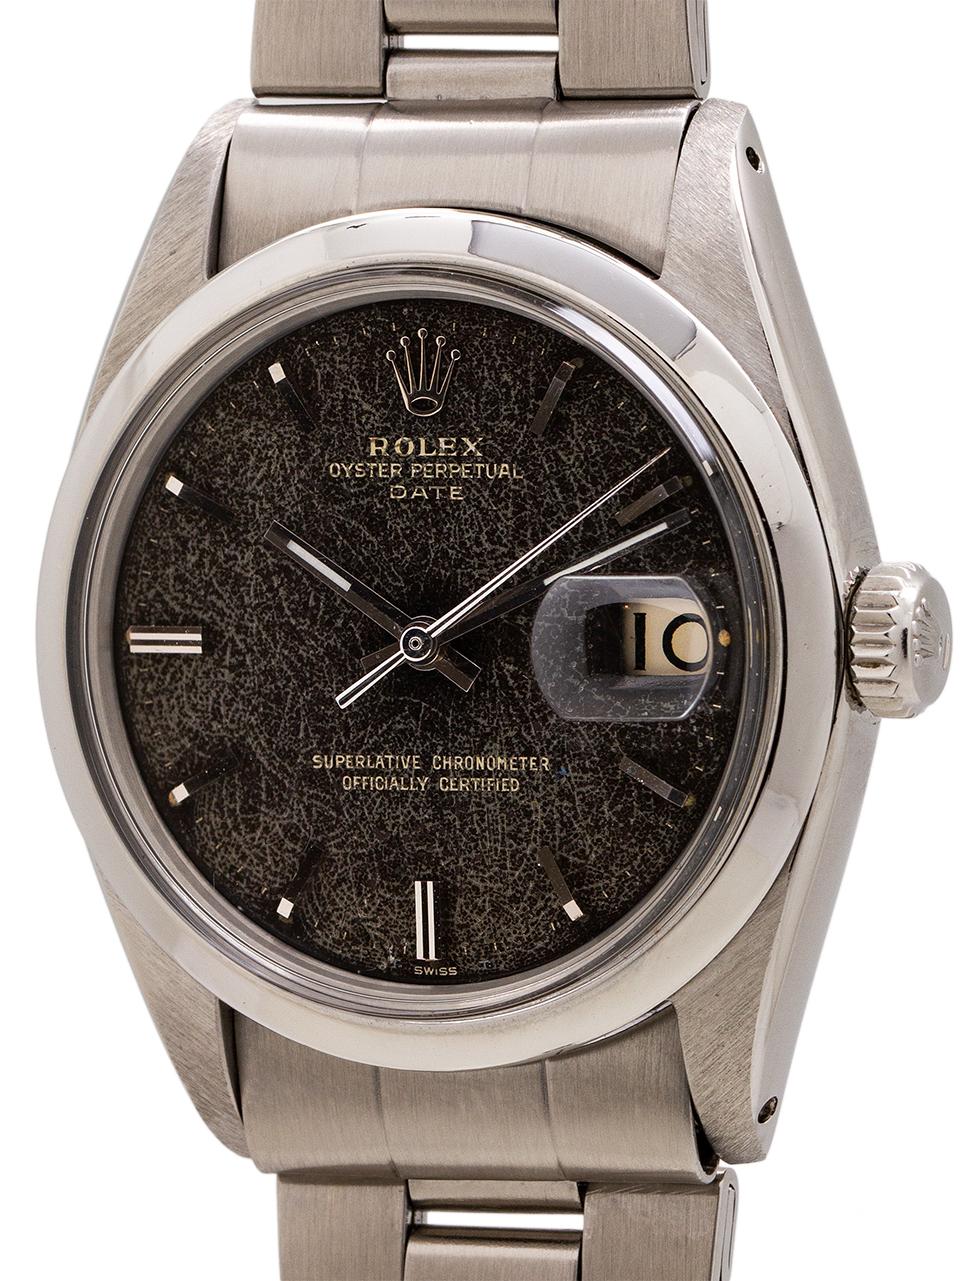 
Rolex Oyster Perpetual Date ref 1500 circa 1959. Featuring 34mm diameter case with smooth bezel and acrylic crystal. The standout here is the original gilt dial. The gilt surface has spidered out and aged slightly tropical. The combination is